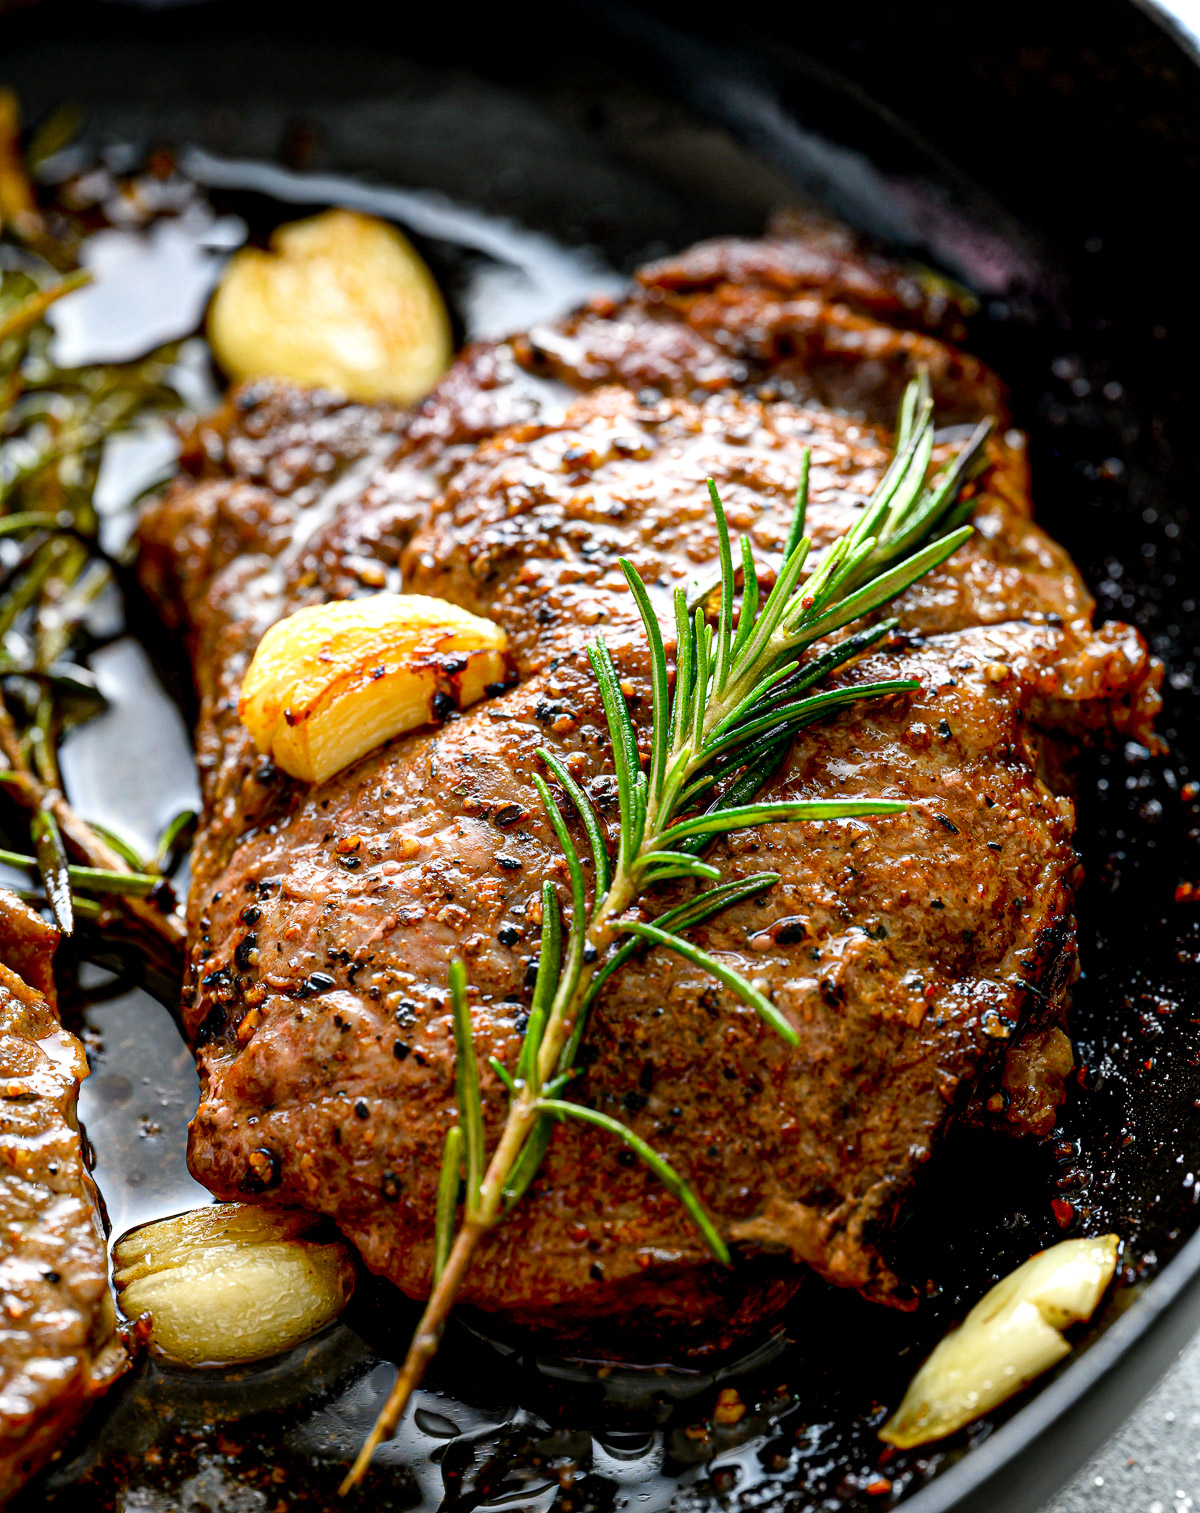 steak with rosemary and garlic cloves in a cast iron pan